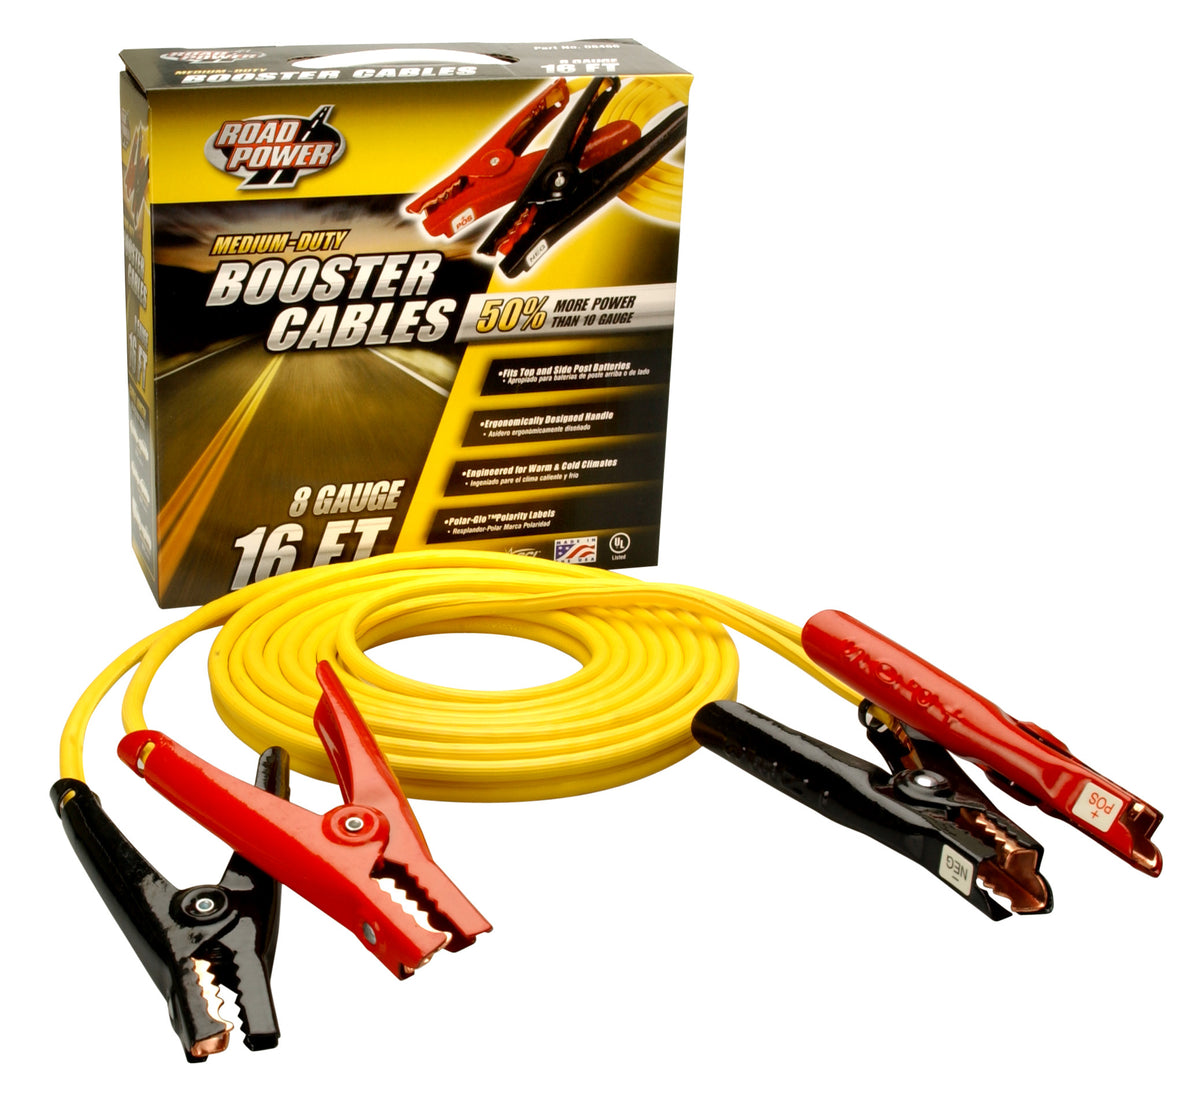 Road Power 08466-00-02 8-Gauge Booster Cable, 16'